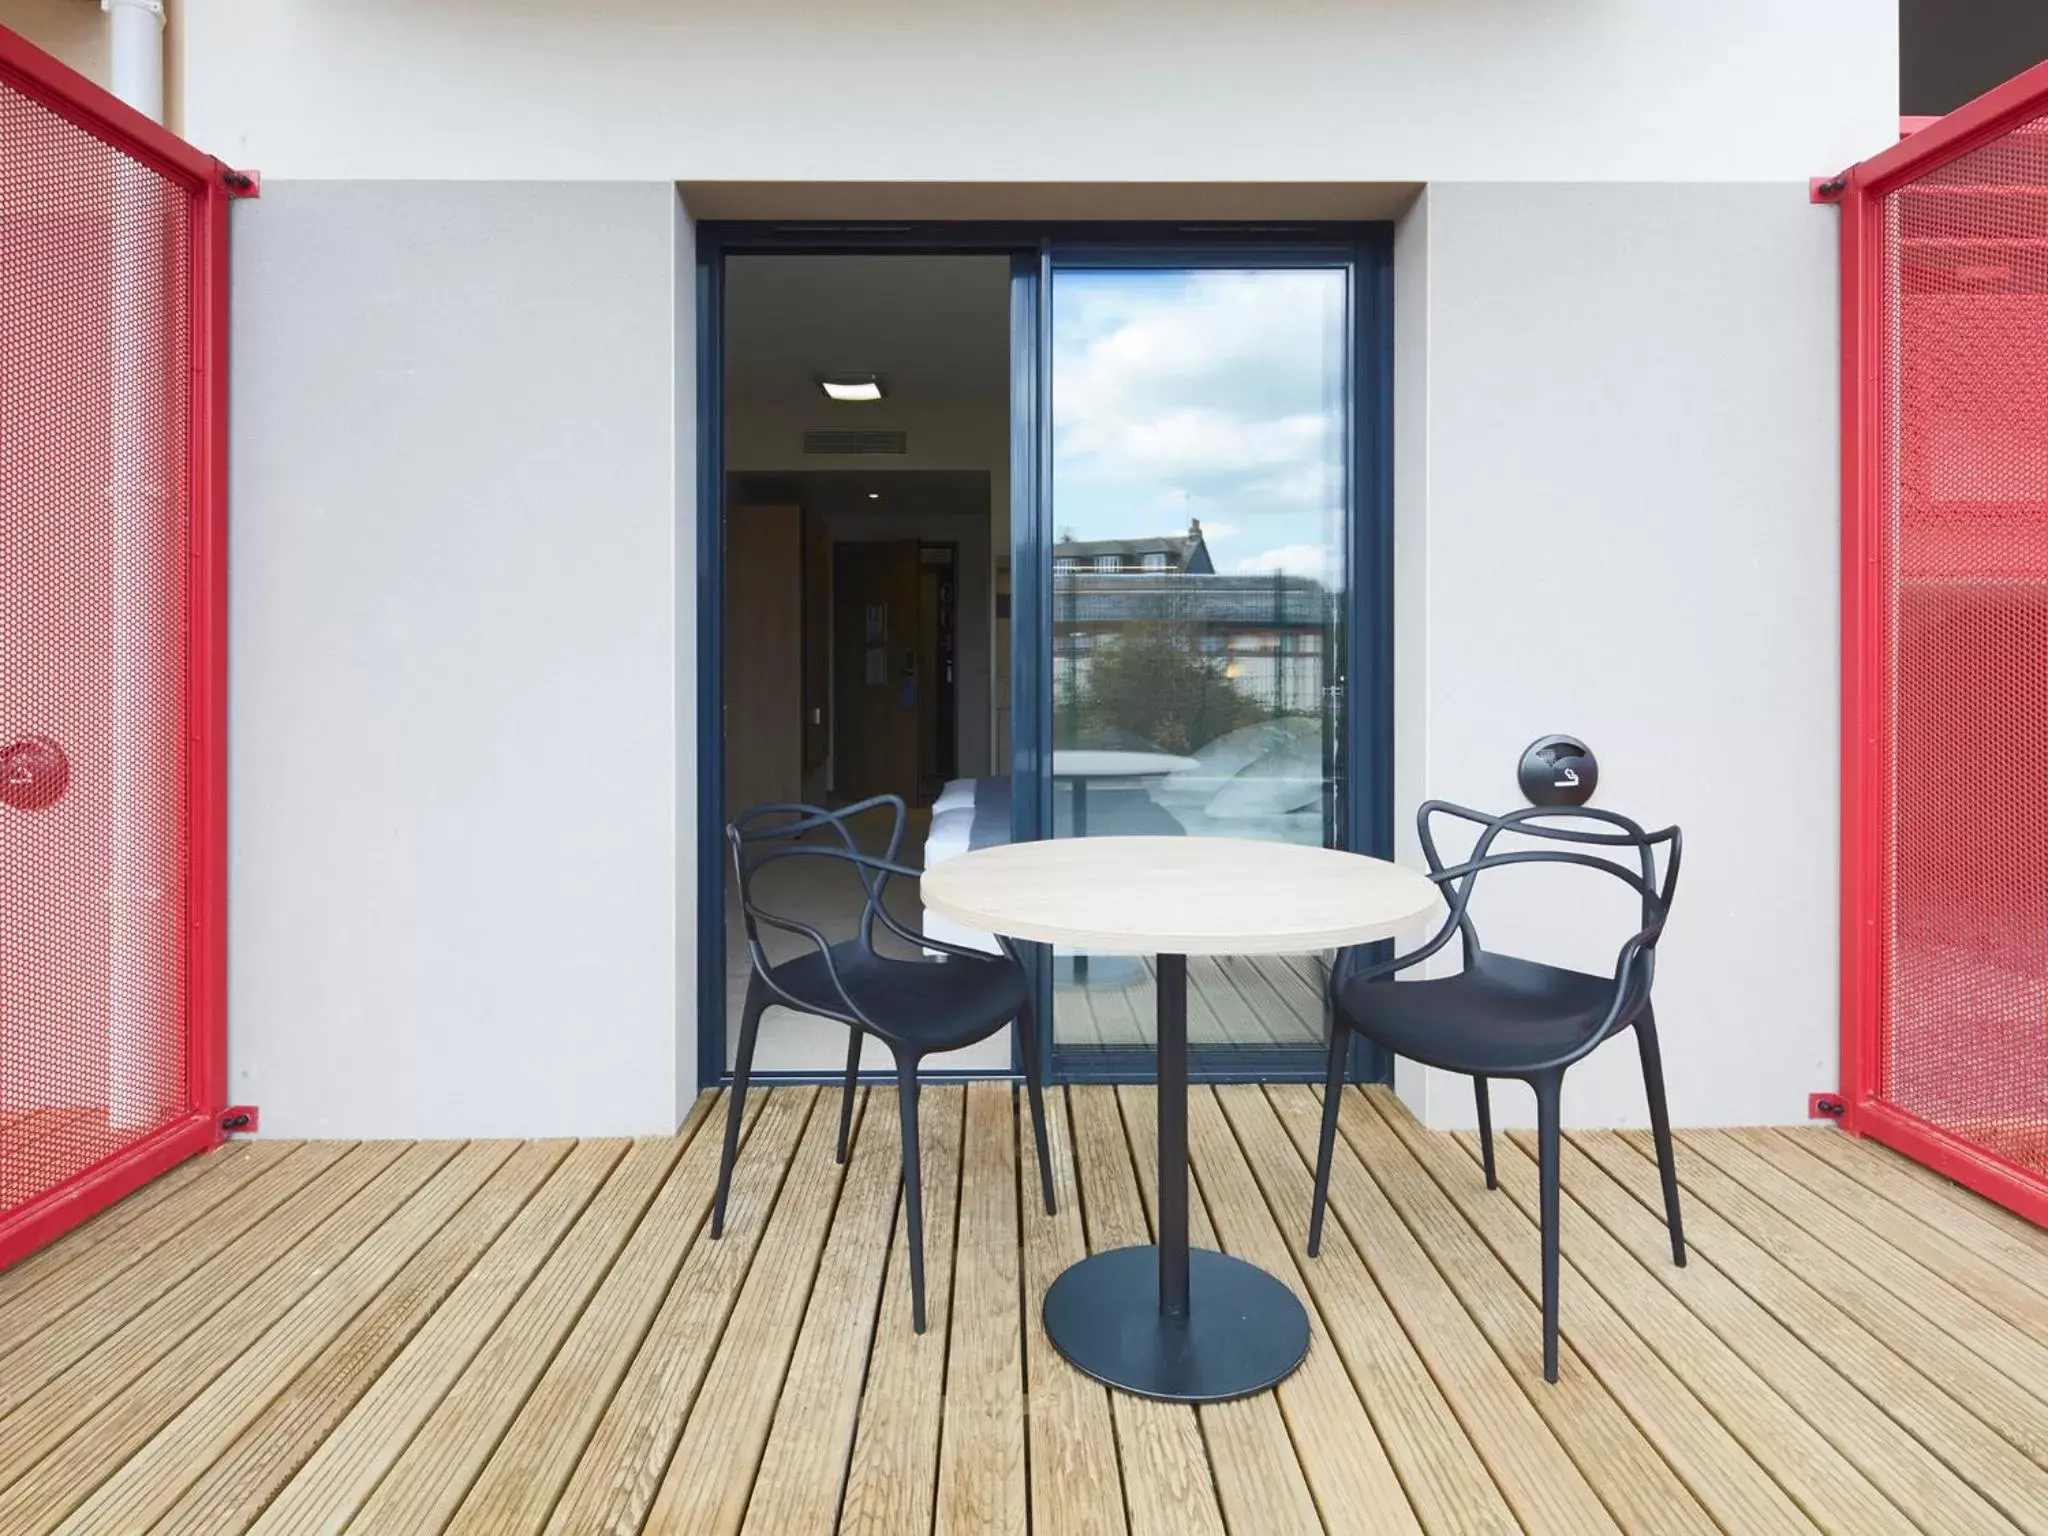 Balcony/Terrace, Patio/Outdoor Area in Kyriad Prestige Residence Cabourg-Dives-sur-Mer